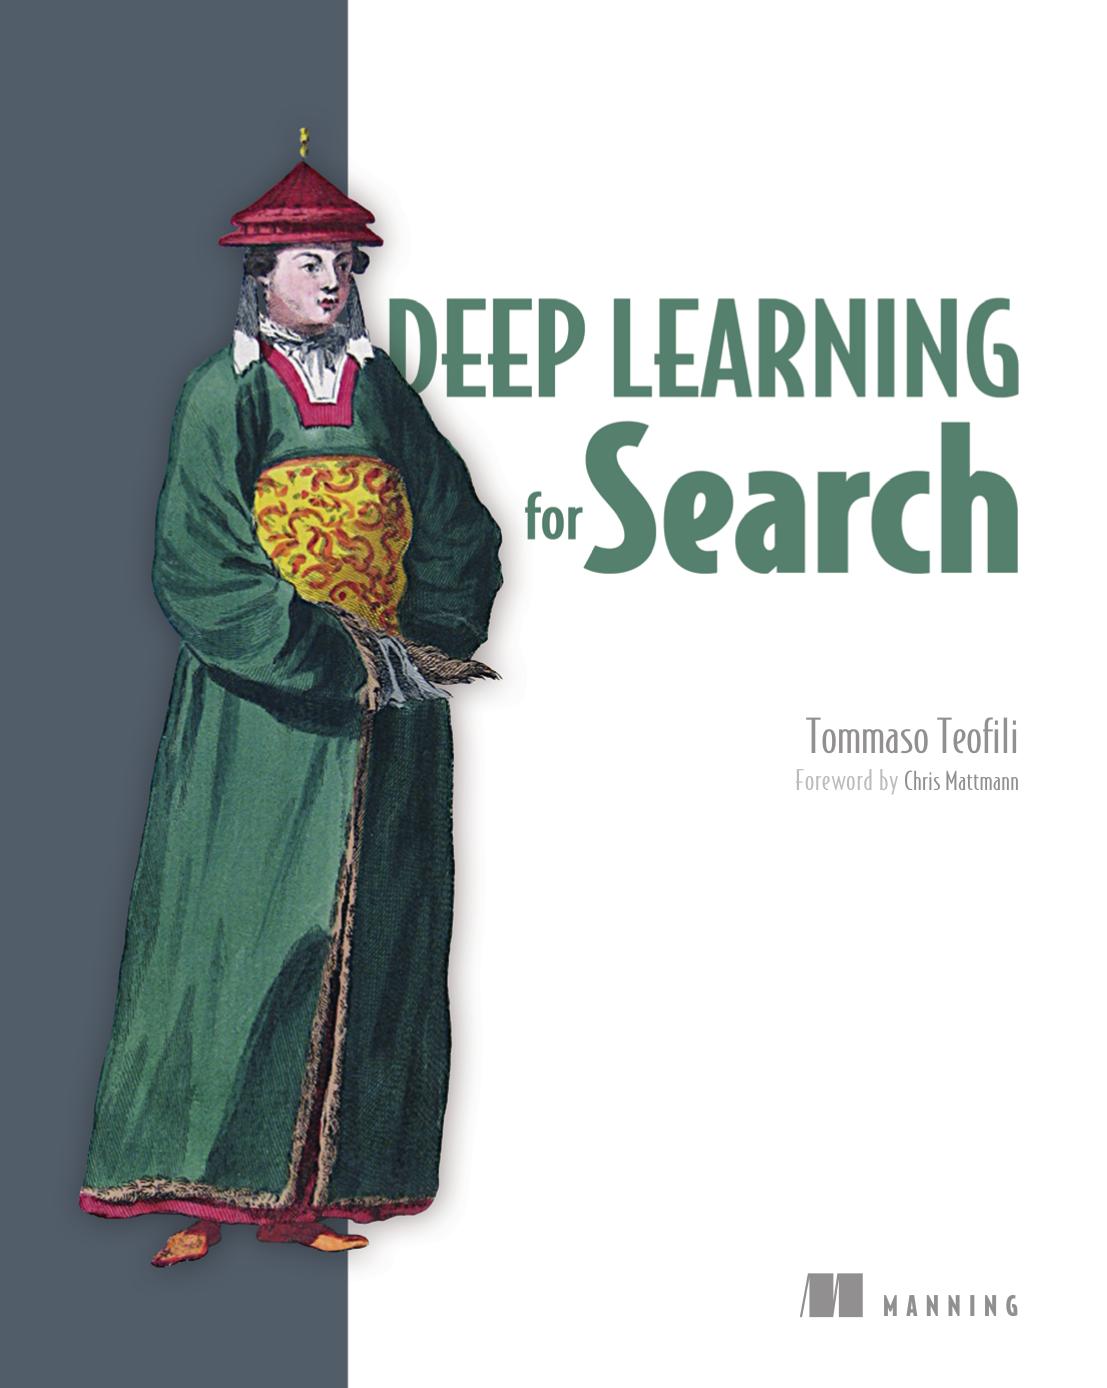 Deep Learning for Search by Tommaso Teofili